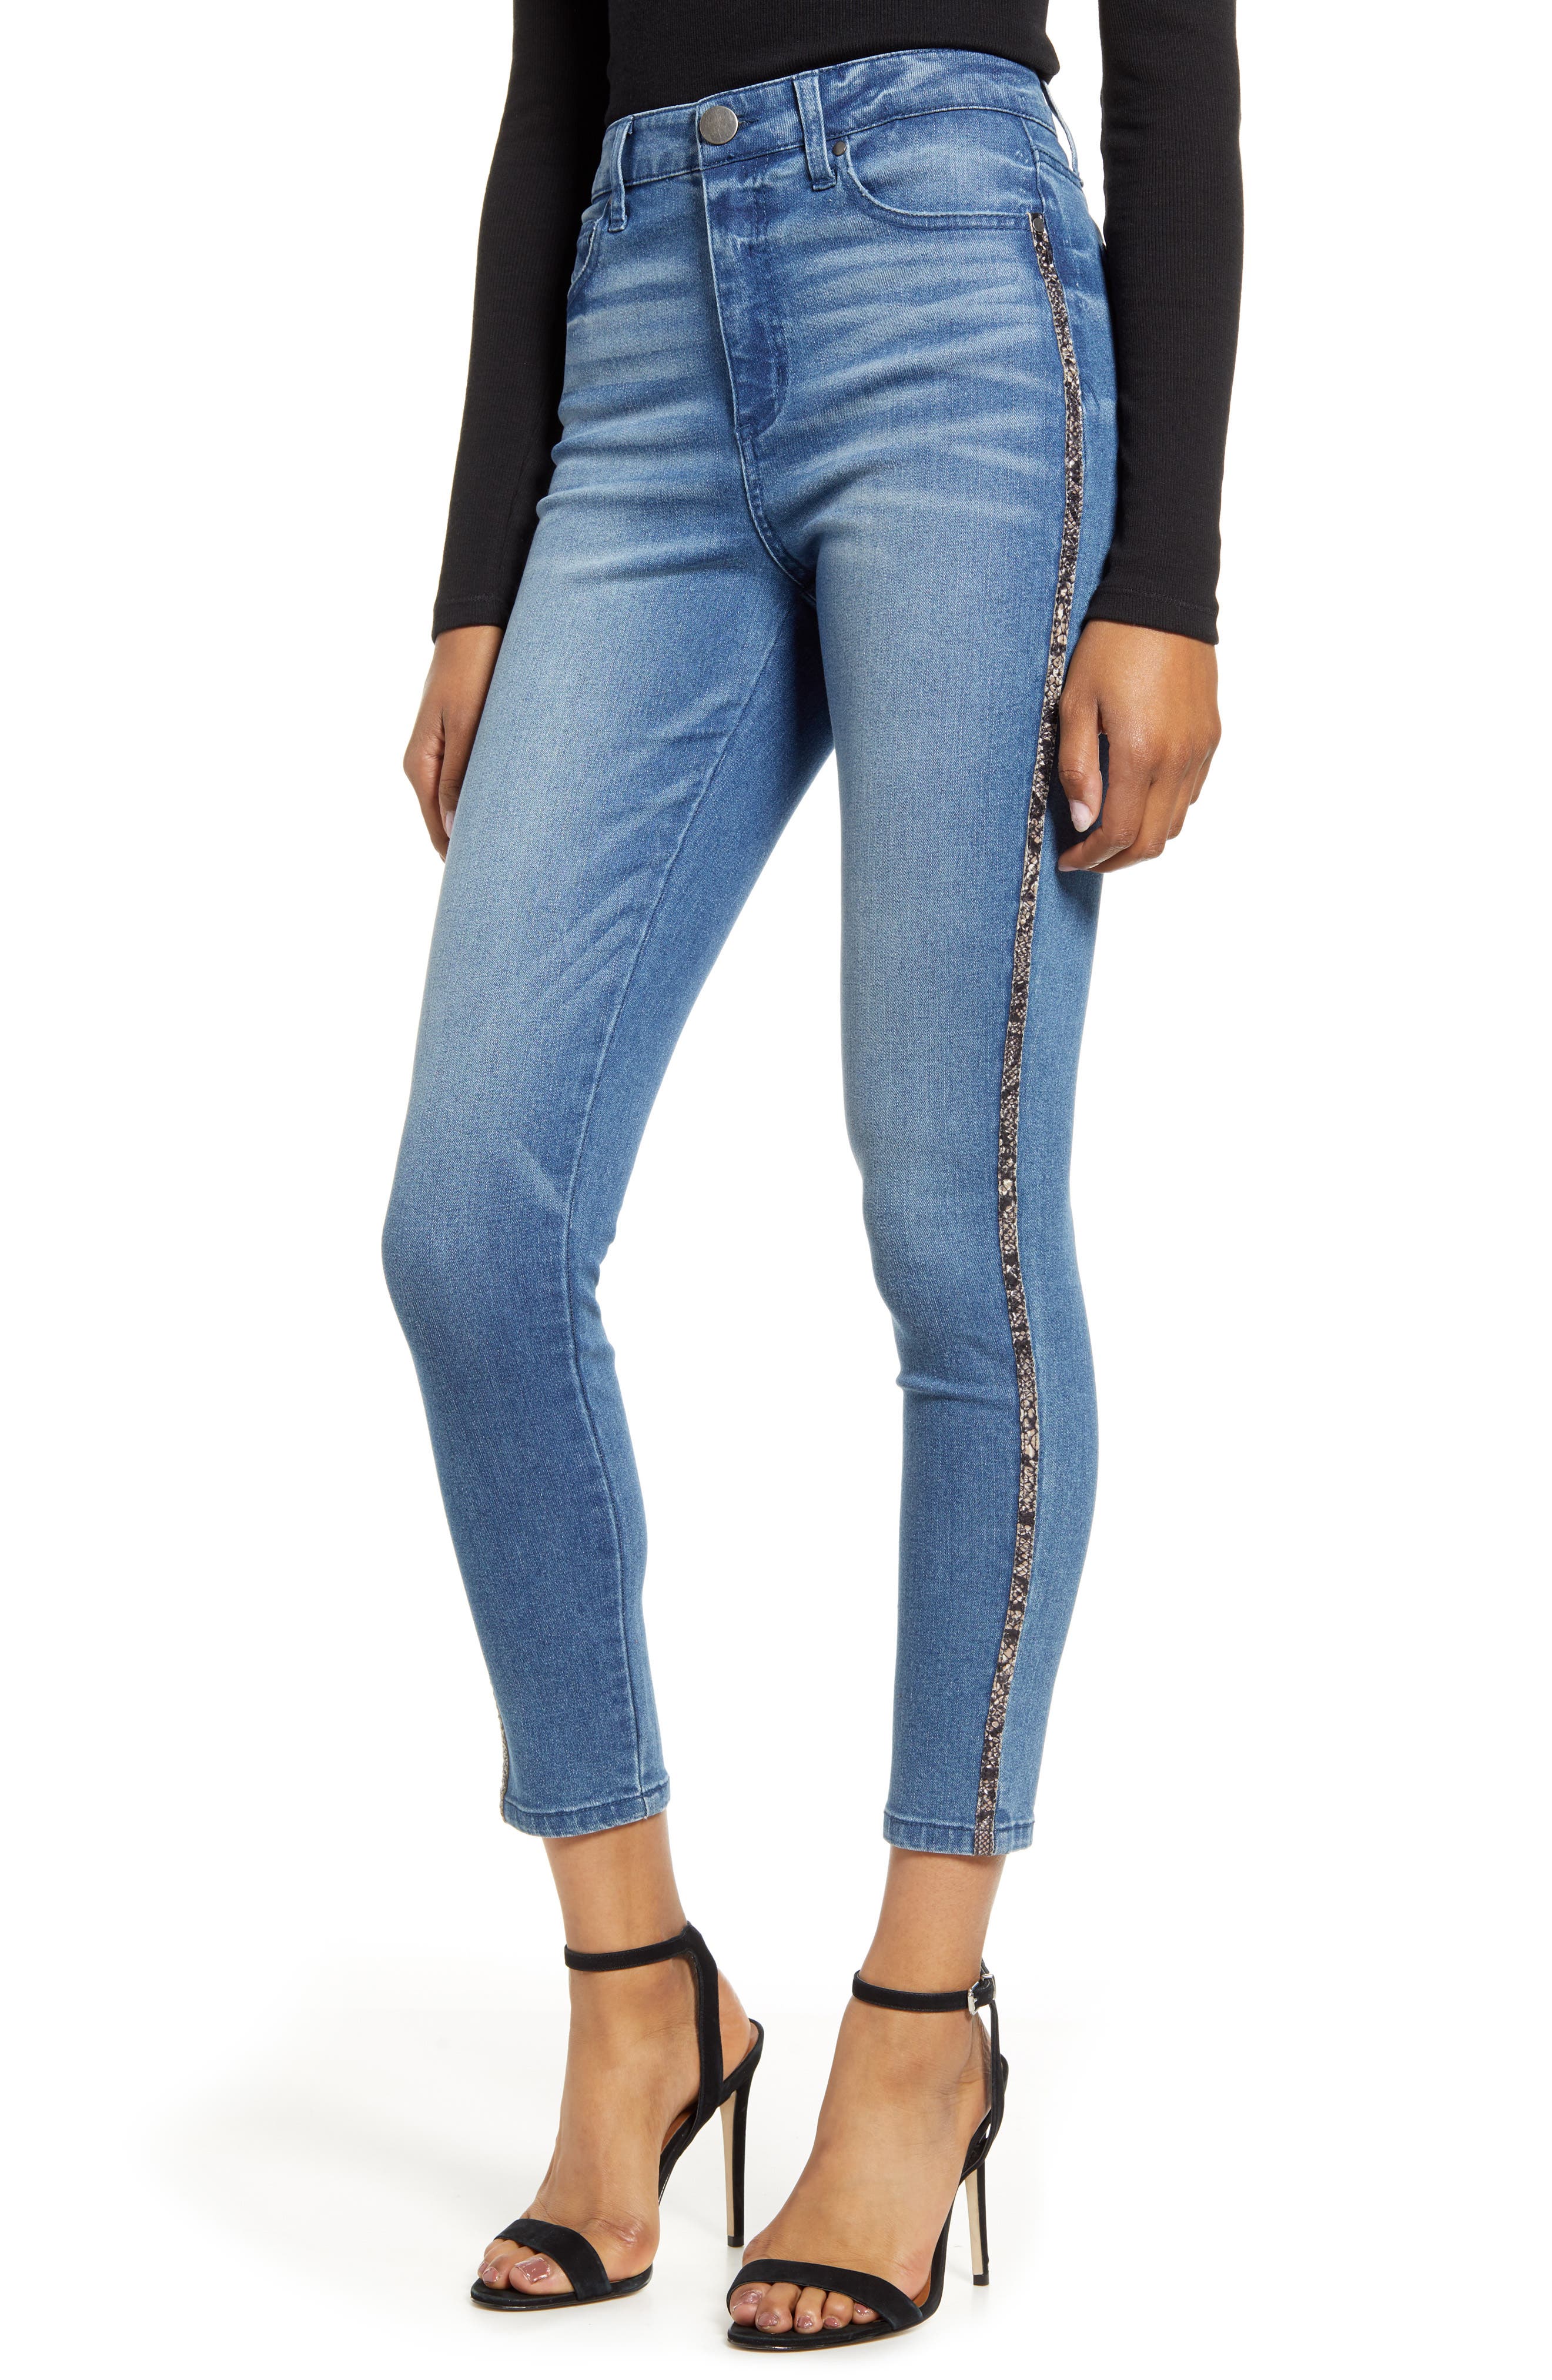 jeans with white stripe down the side